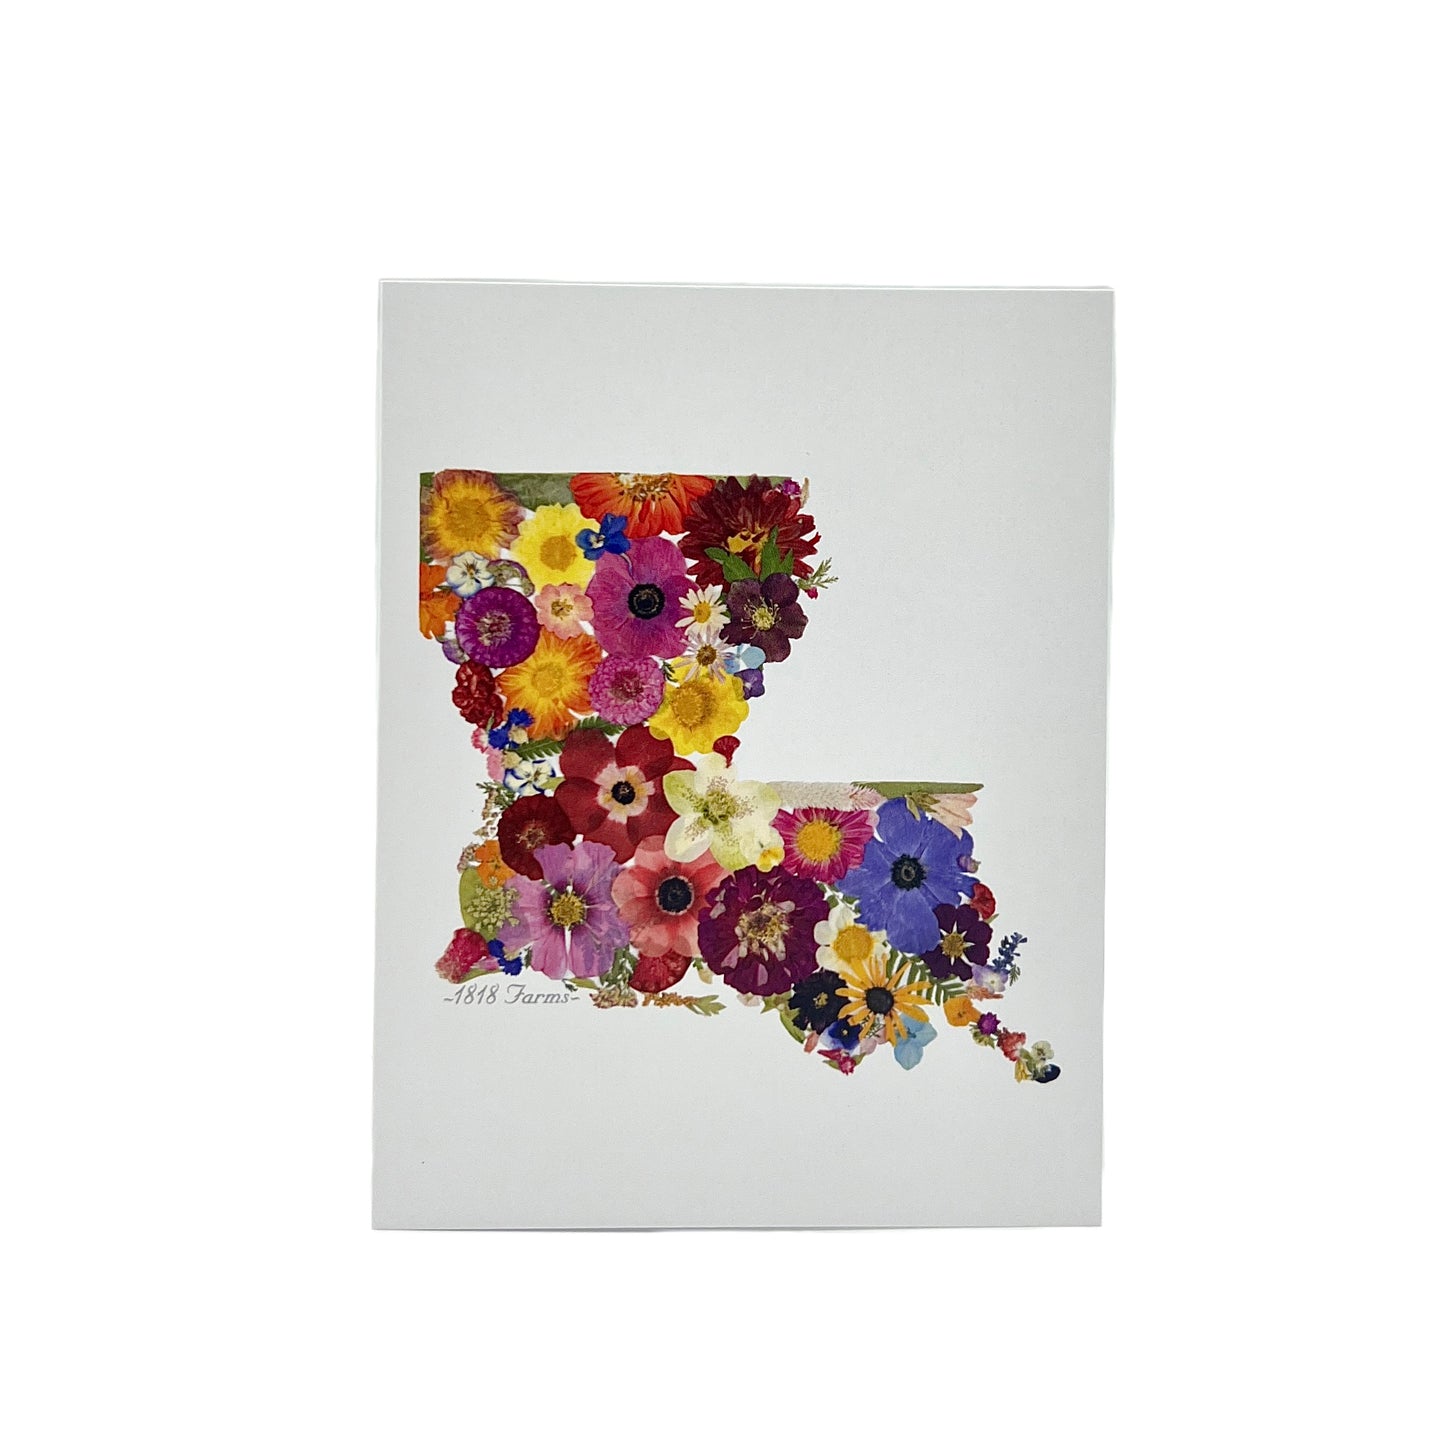 Louisiana Themed Notecards (Set of 6) Featuring Dried, Pressed Flowers - "Where I Bloom" Collection Notecard 1818 Farms   